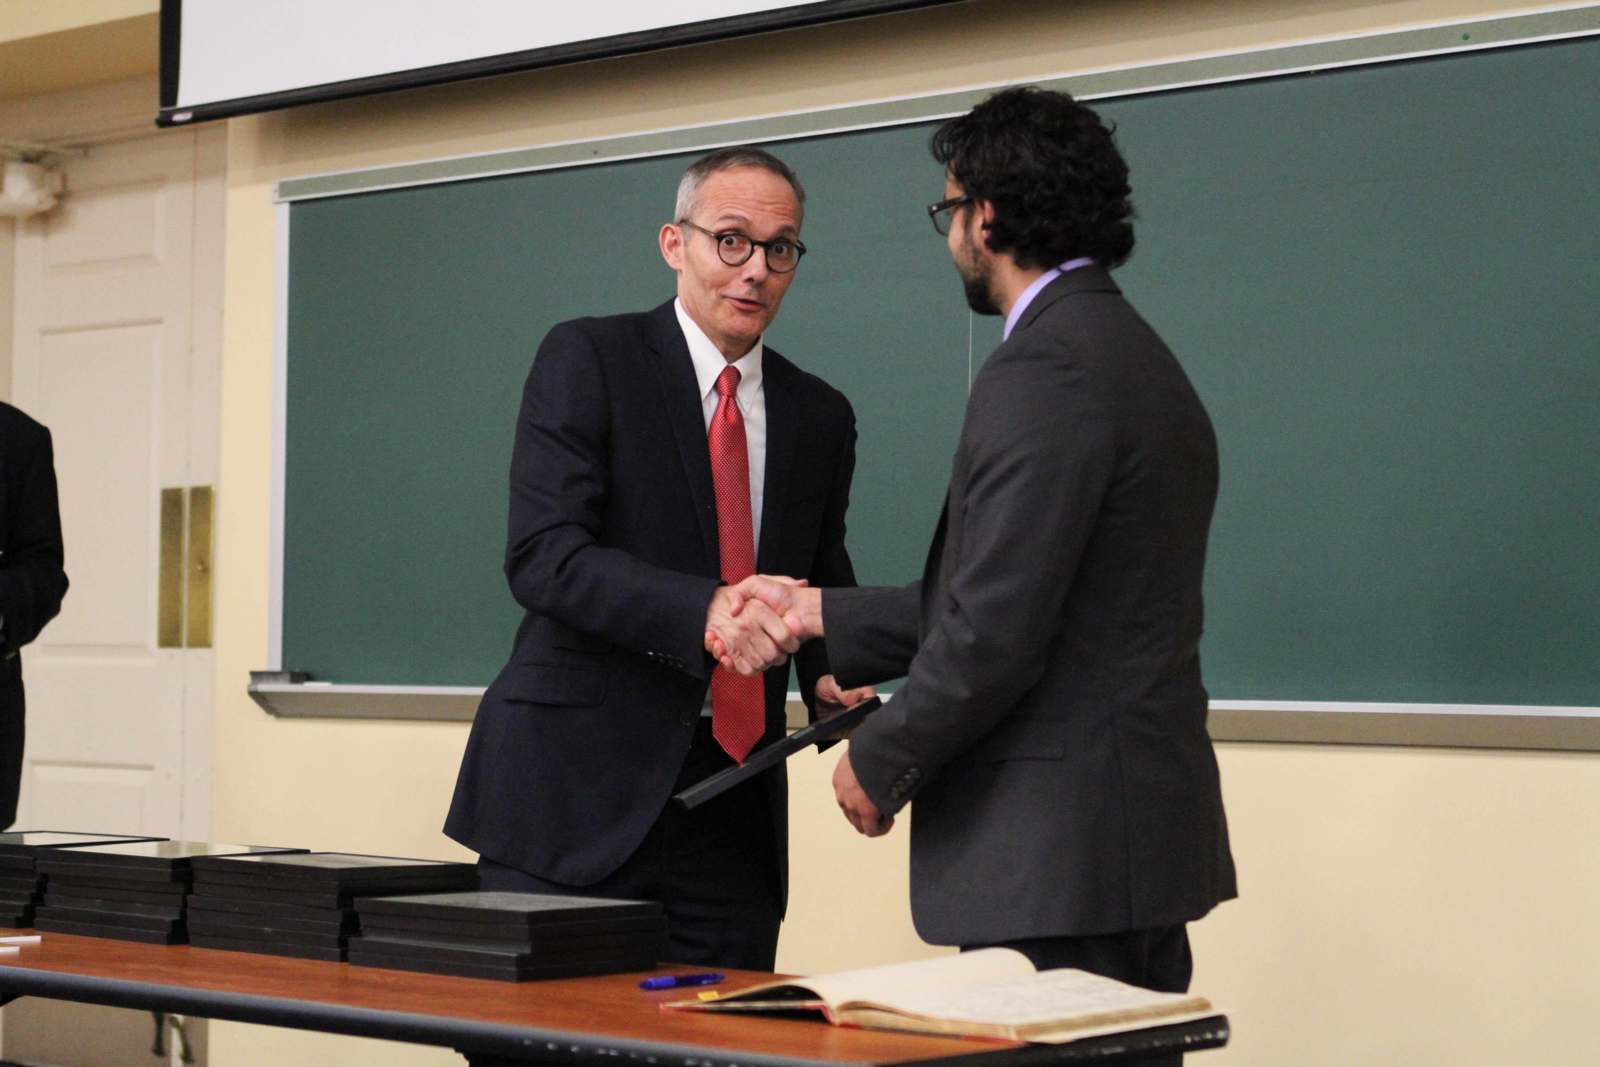 a man shaking hands with another man in front of a chalkboard